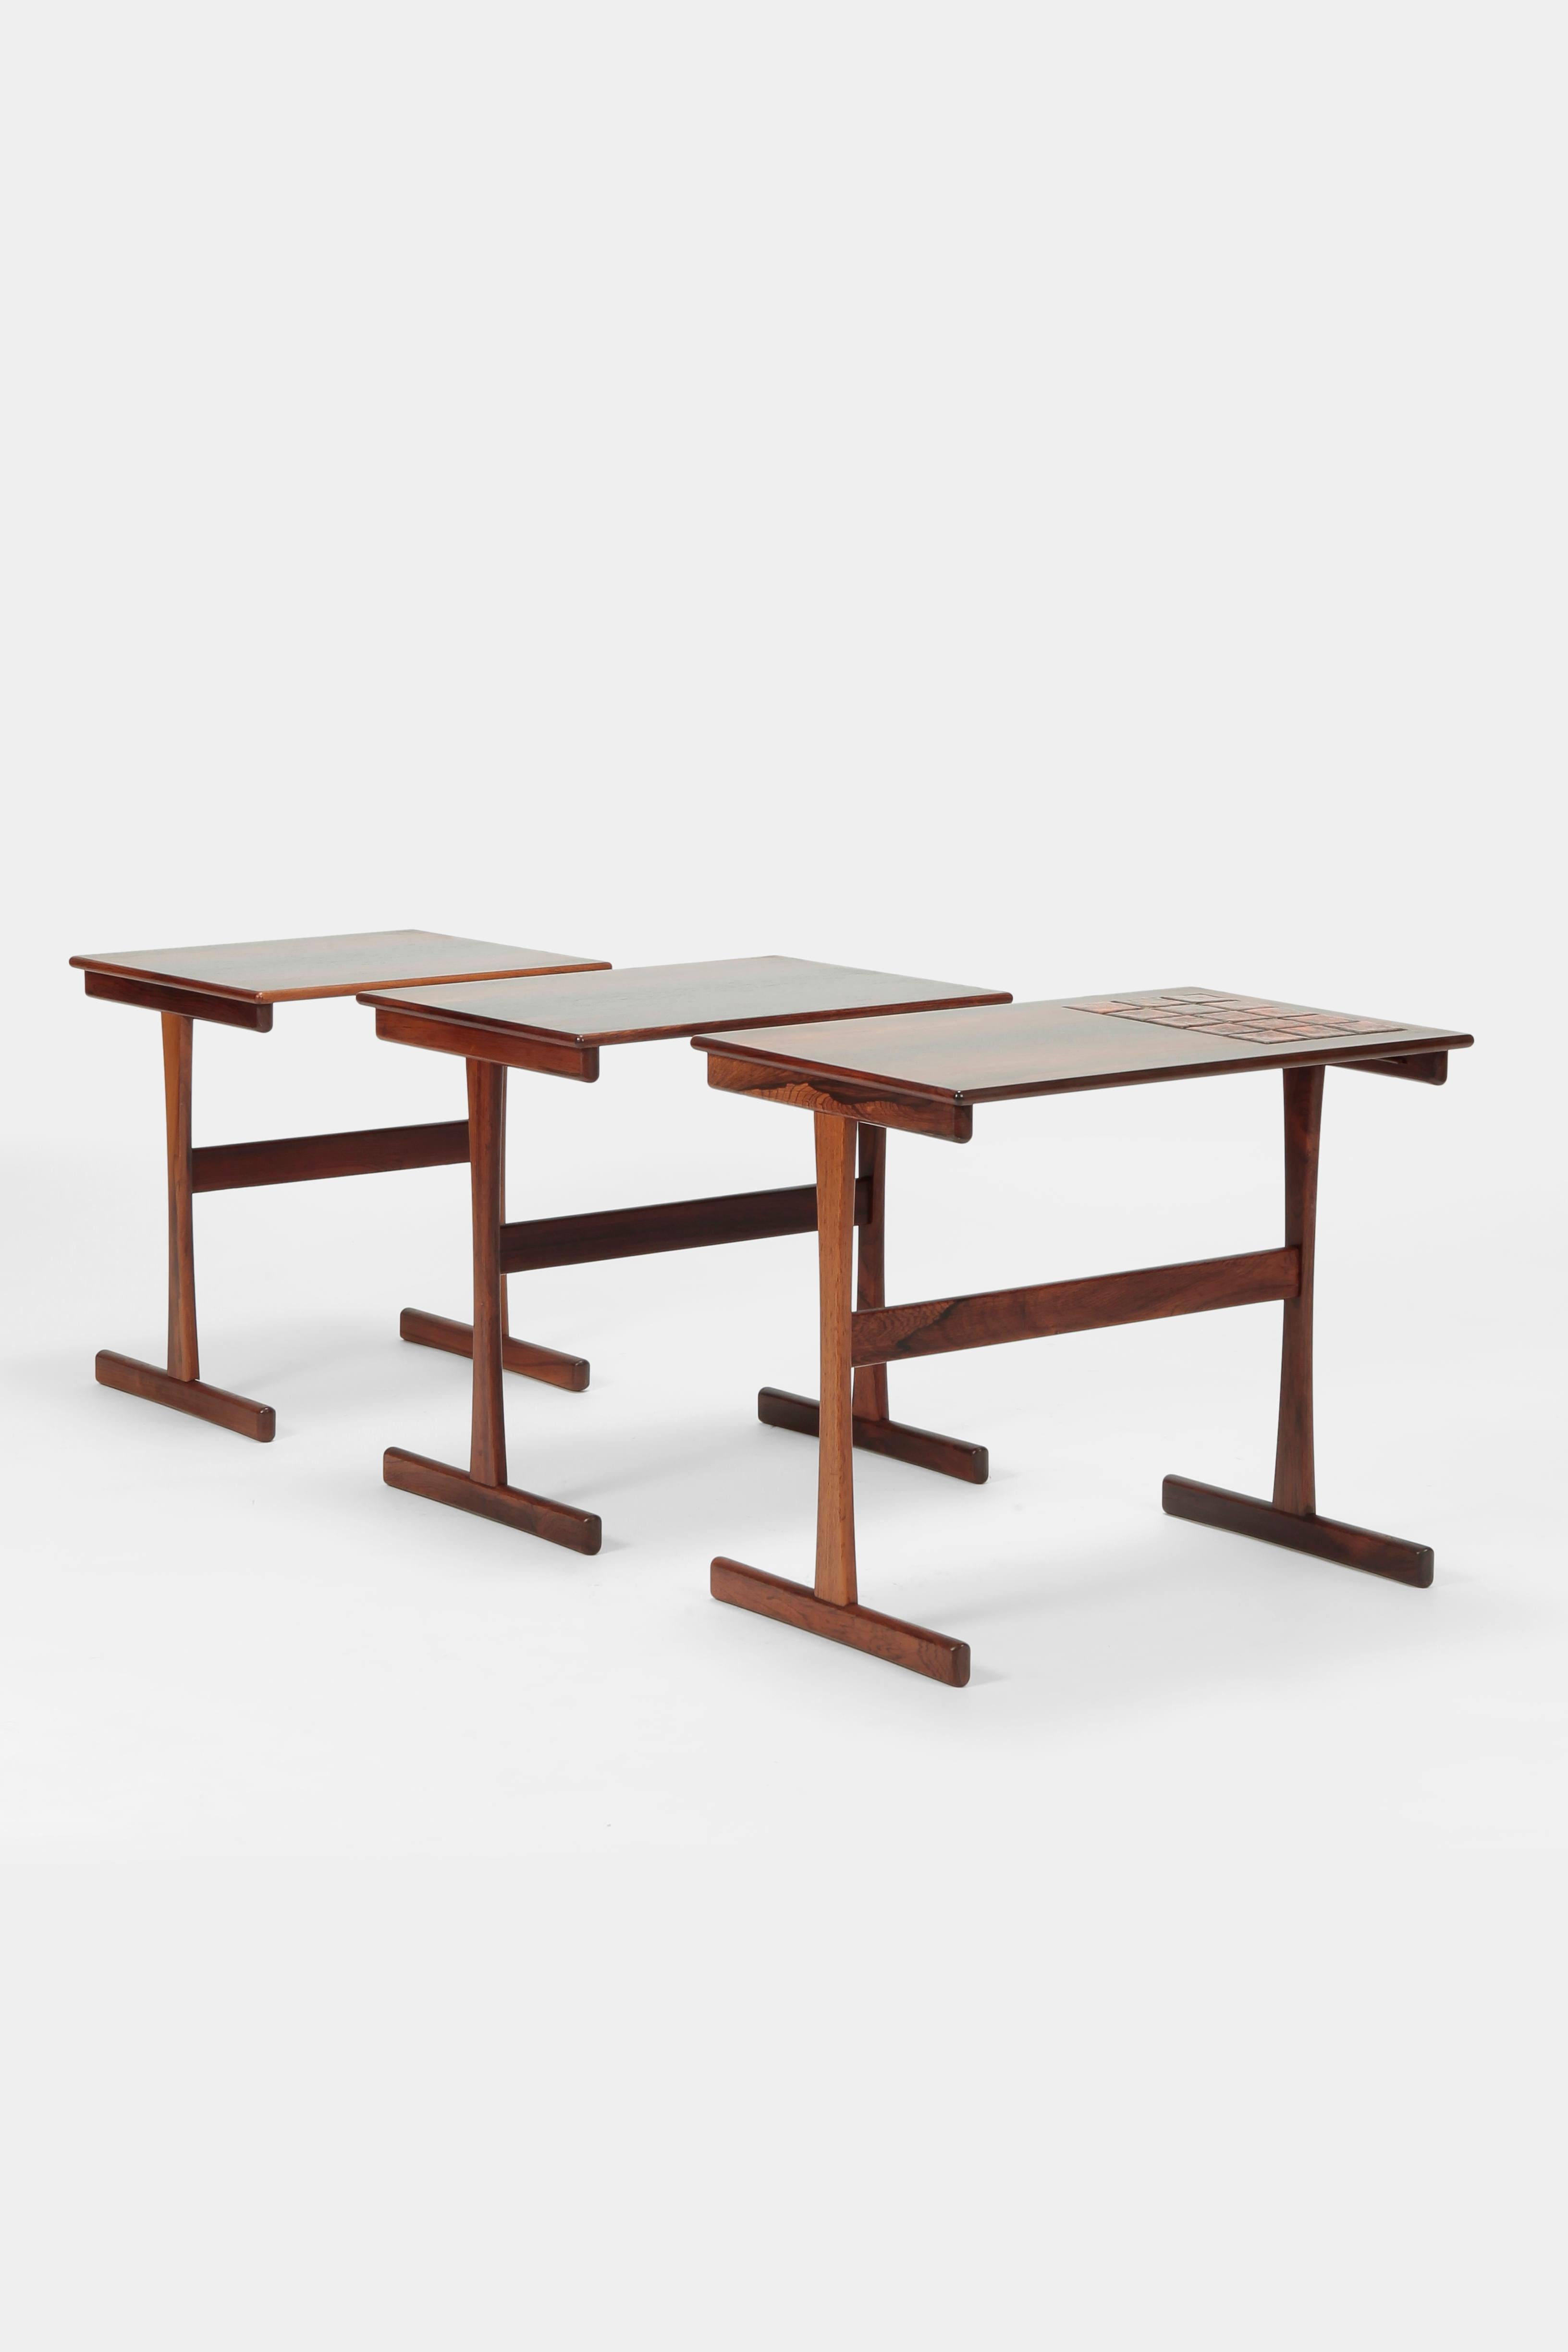 Three beautiful rosewood set tables designed by Kai Kristiansen with ceramic elements on the largest table, manufactured by Vildbjerg Mobelfabrik in the 1960s. Beautiful warm wooden structure, very sculpturally created objects, practically sliding